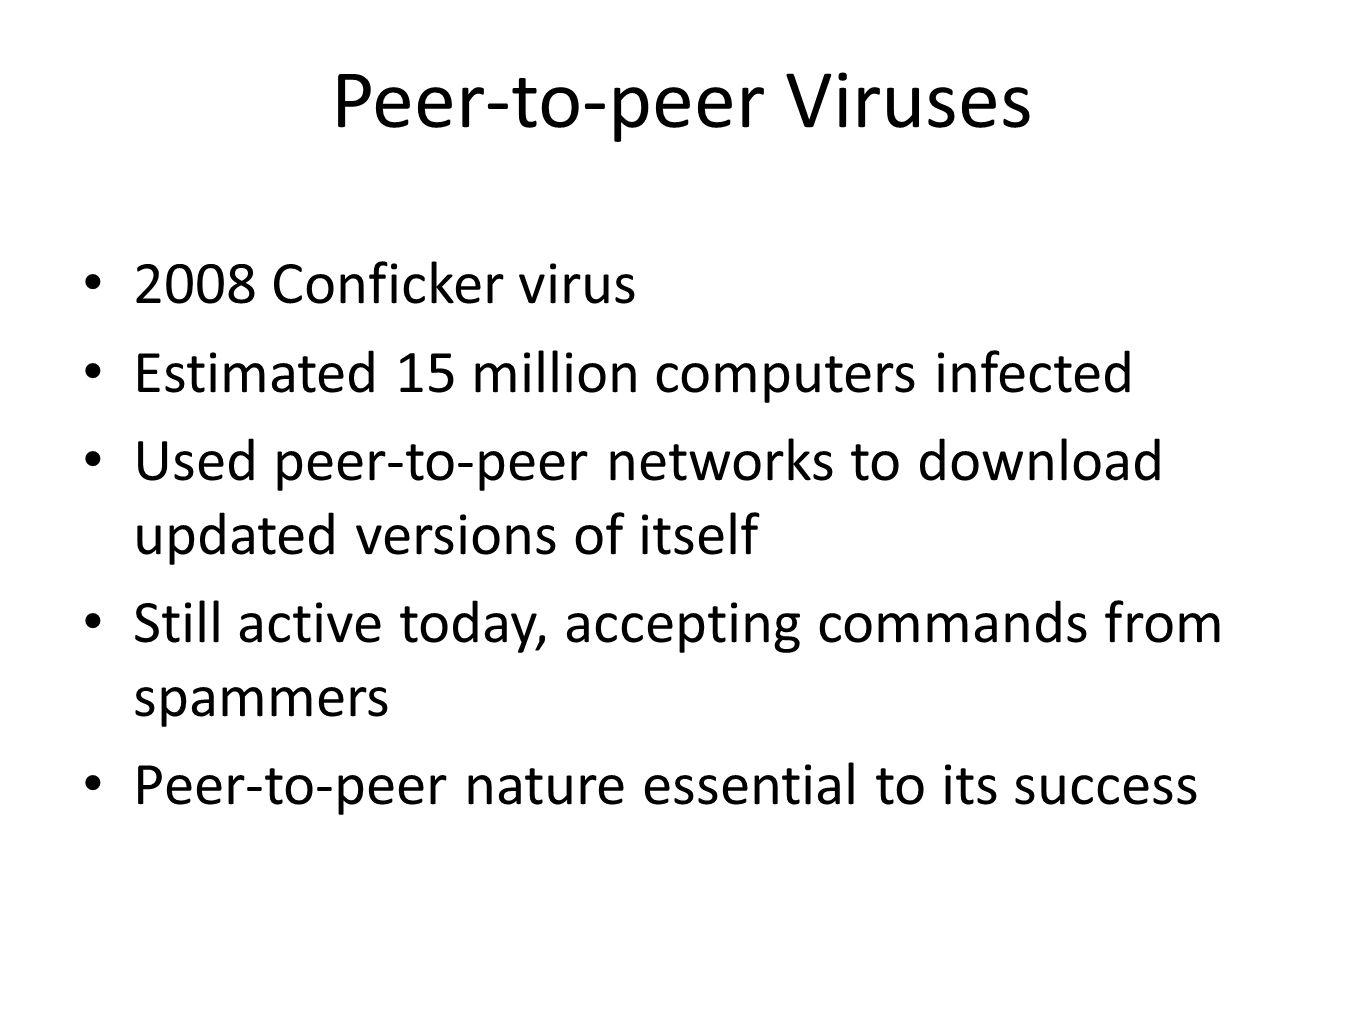 Peer-to-peer Viruses 2008 Conficker virus Estimated 15 million computers infected Used peer-to-peer networks to download updated versions of itself Still active today, accepting commands from spammers Peer-to-peer nature essential to its success